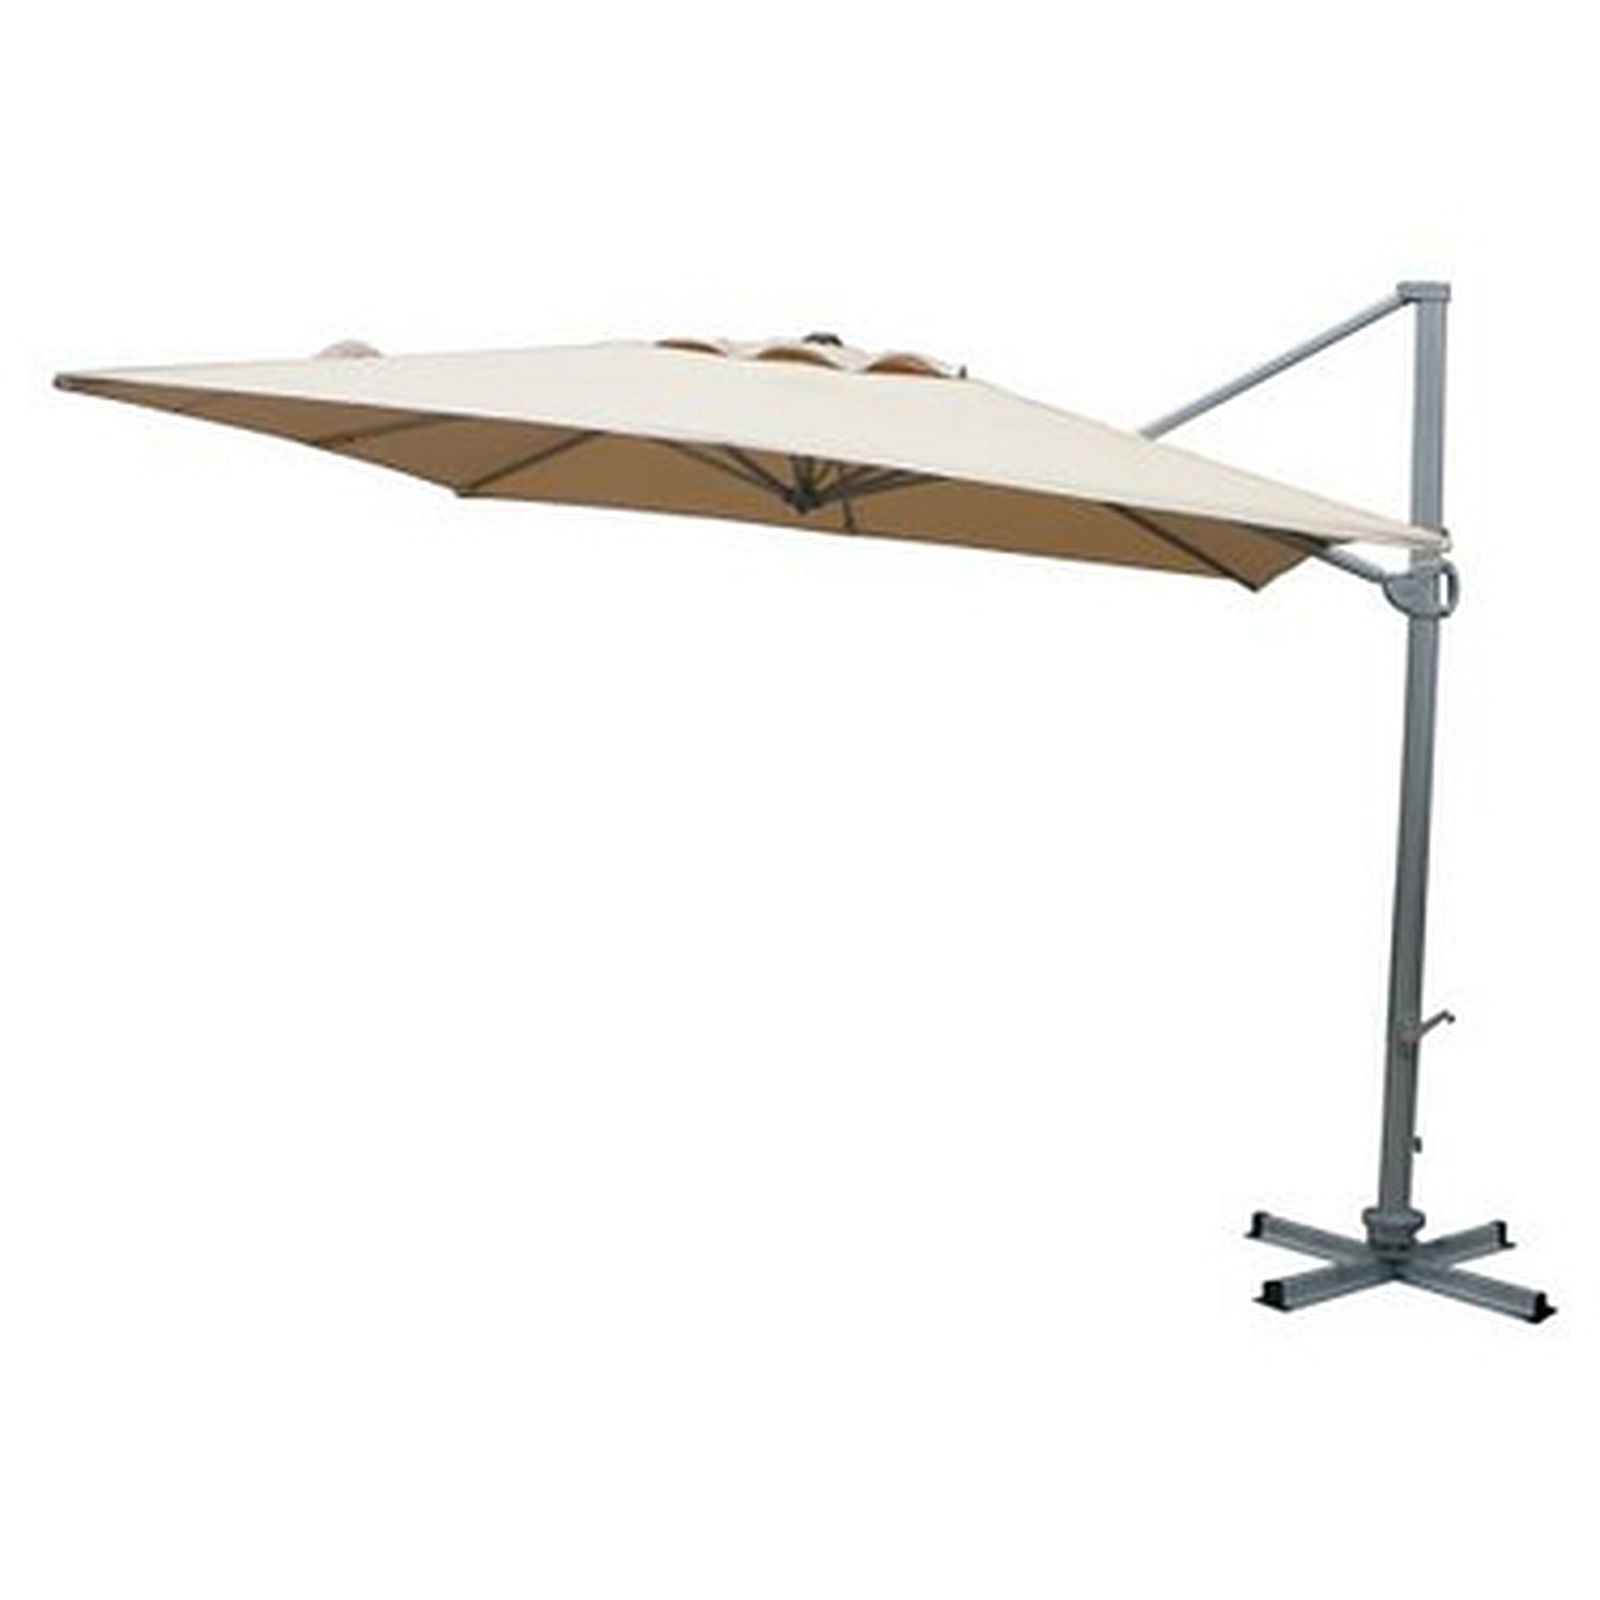 Cantilever Square Outdoor Umbrella With Most Popular Cantilever Umbrellas (View 18 of 20)